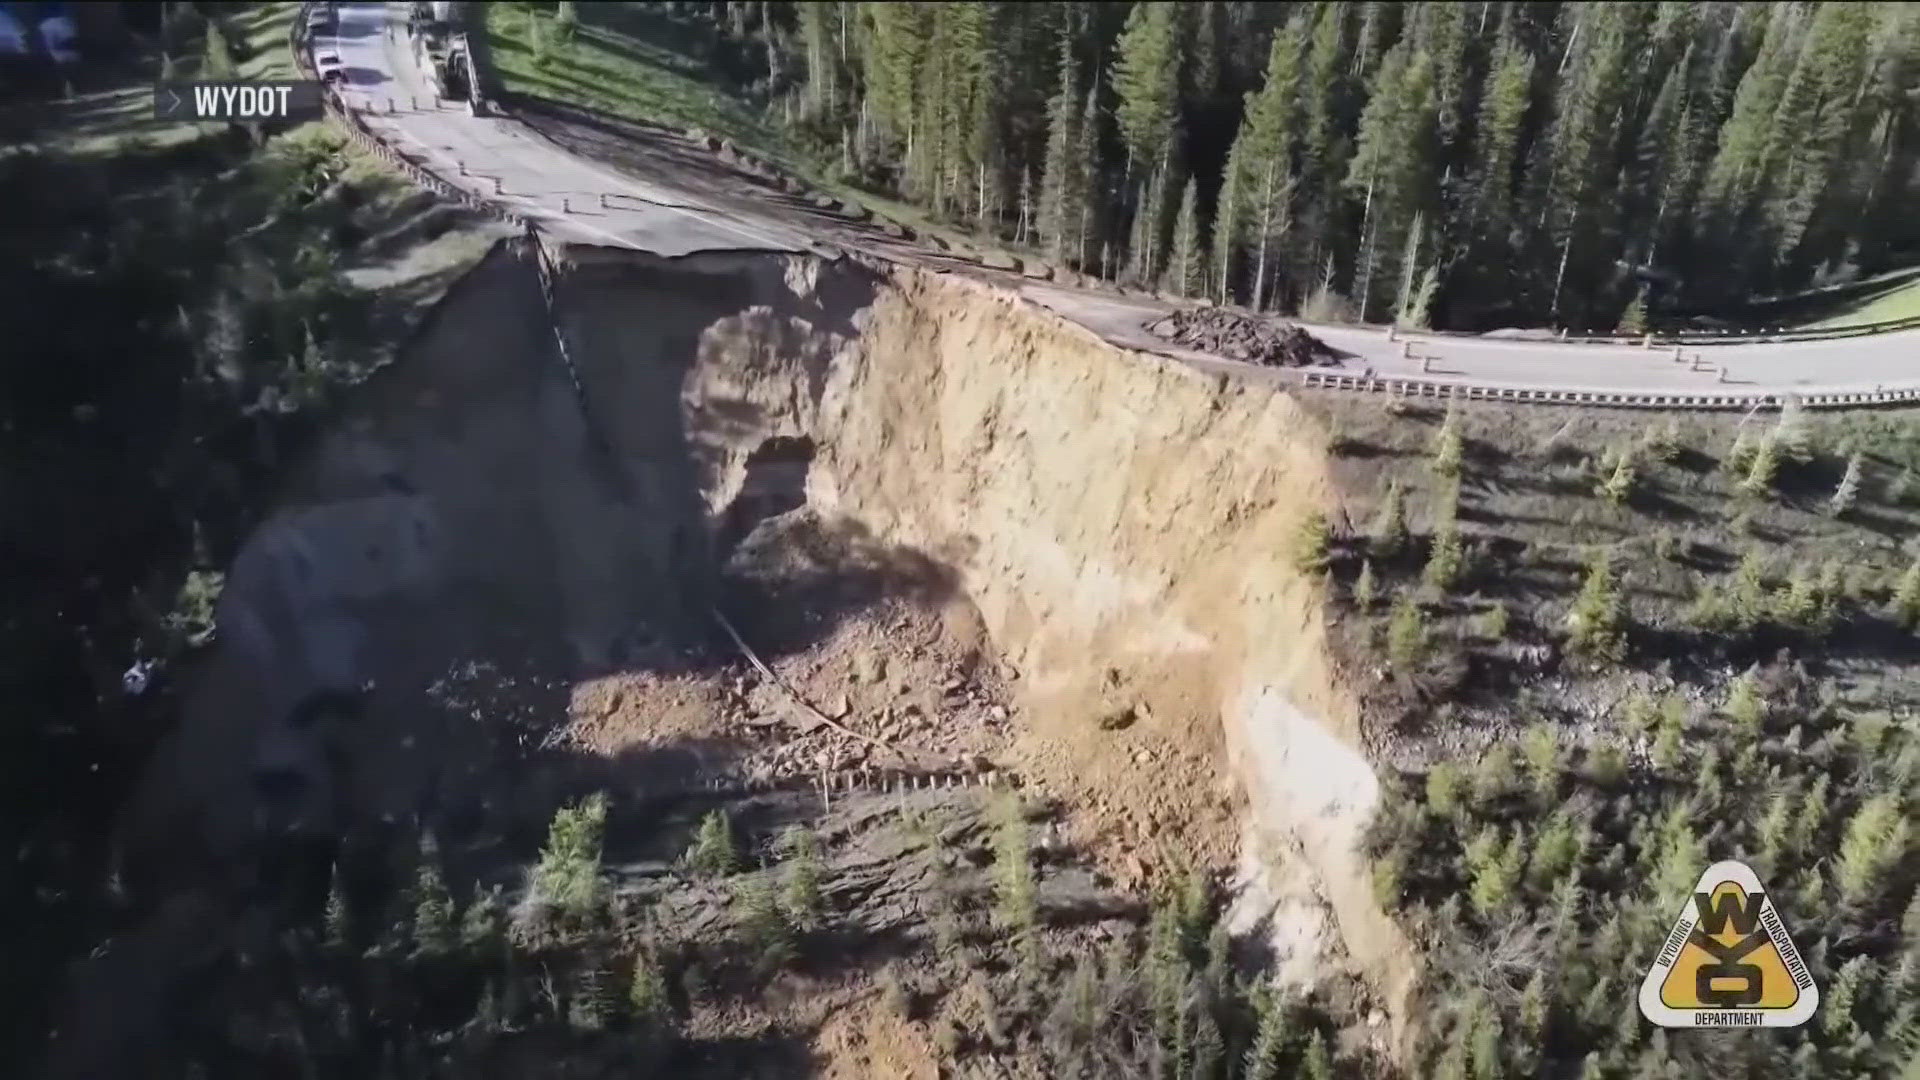 The road connecting Idaho and Wyoming collapsed. Crews are working to clean and repair the stretch of road.